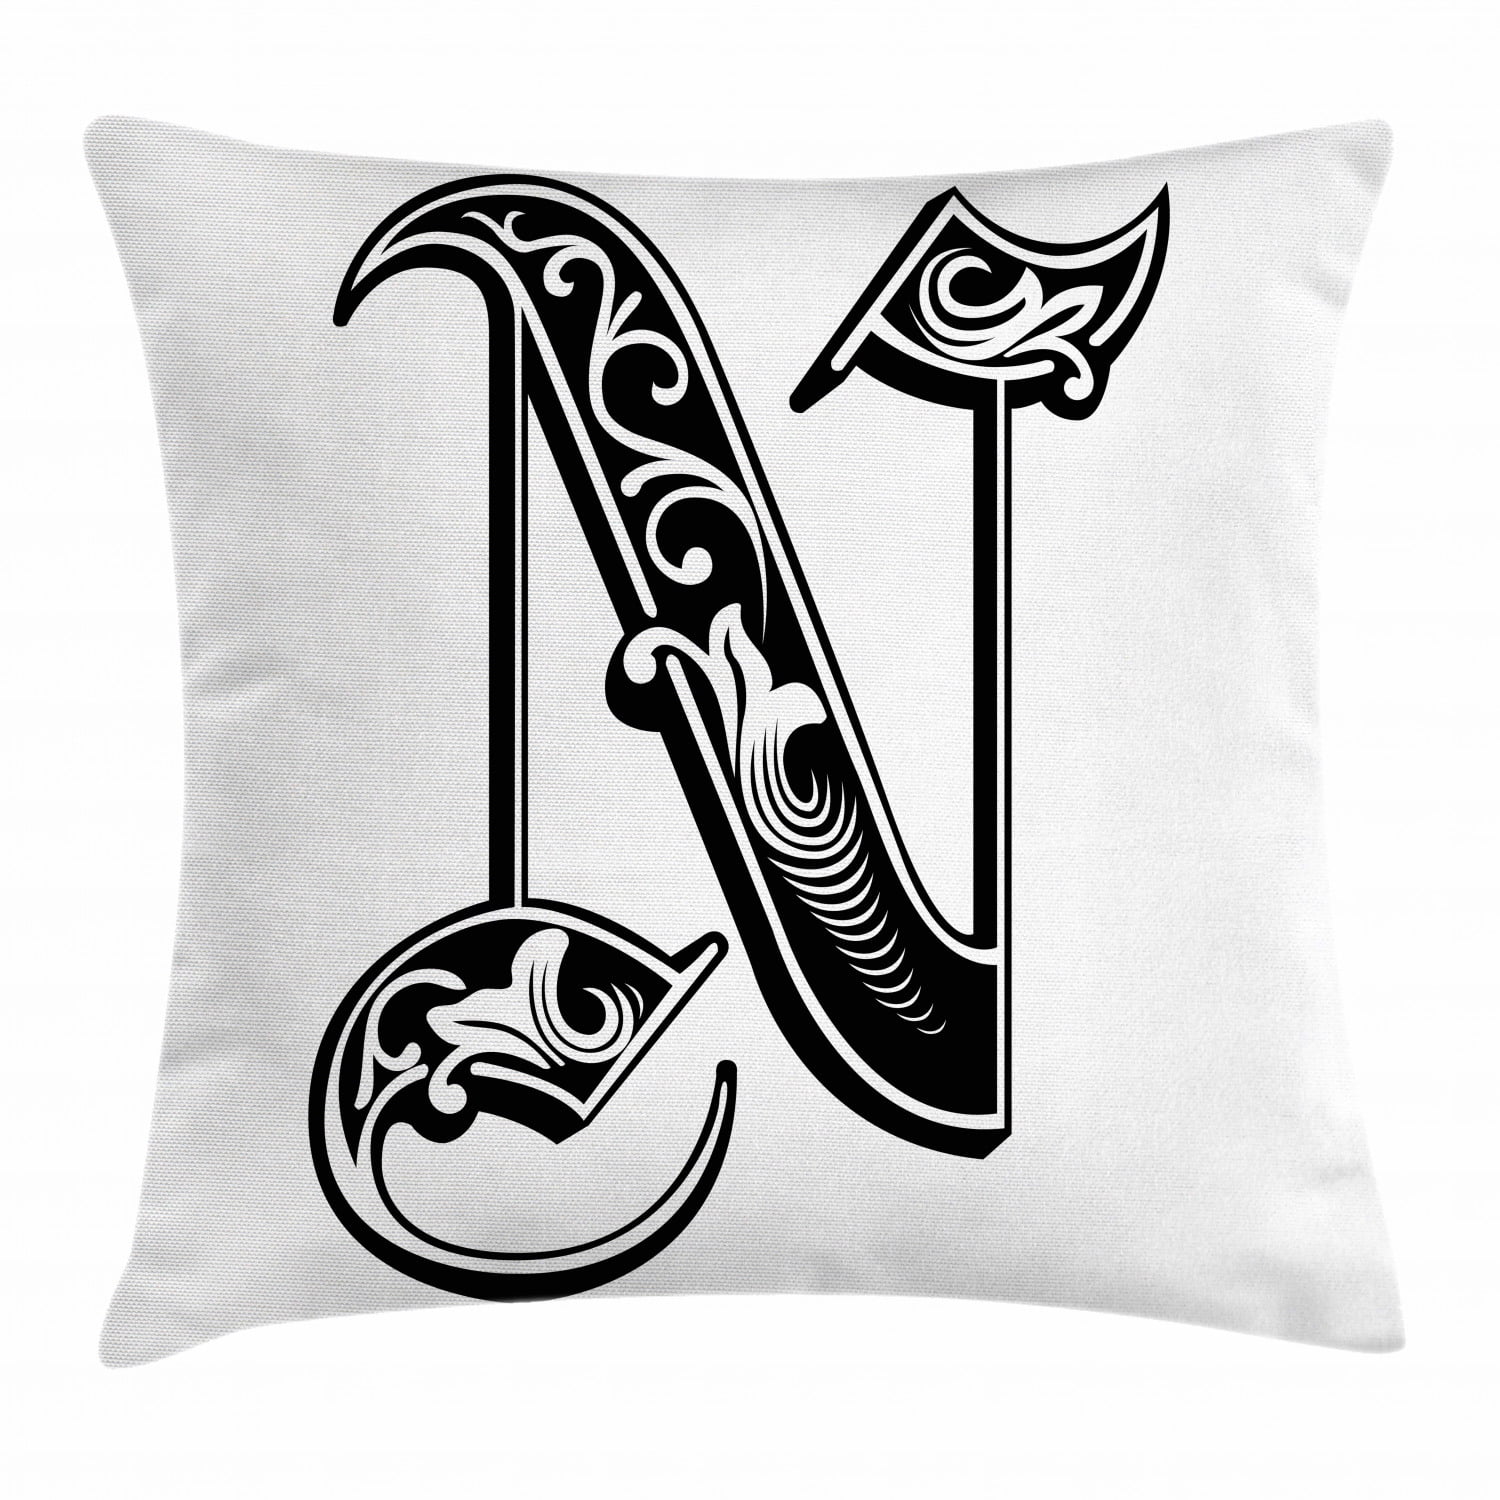 Letter N Throw Pillow Cushion Cover, Gothic Victorian Style Typography  Classic Capital Character N with Floral Swirls, Decorative Square Accent  Pillow ...